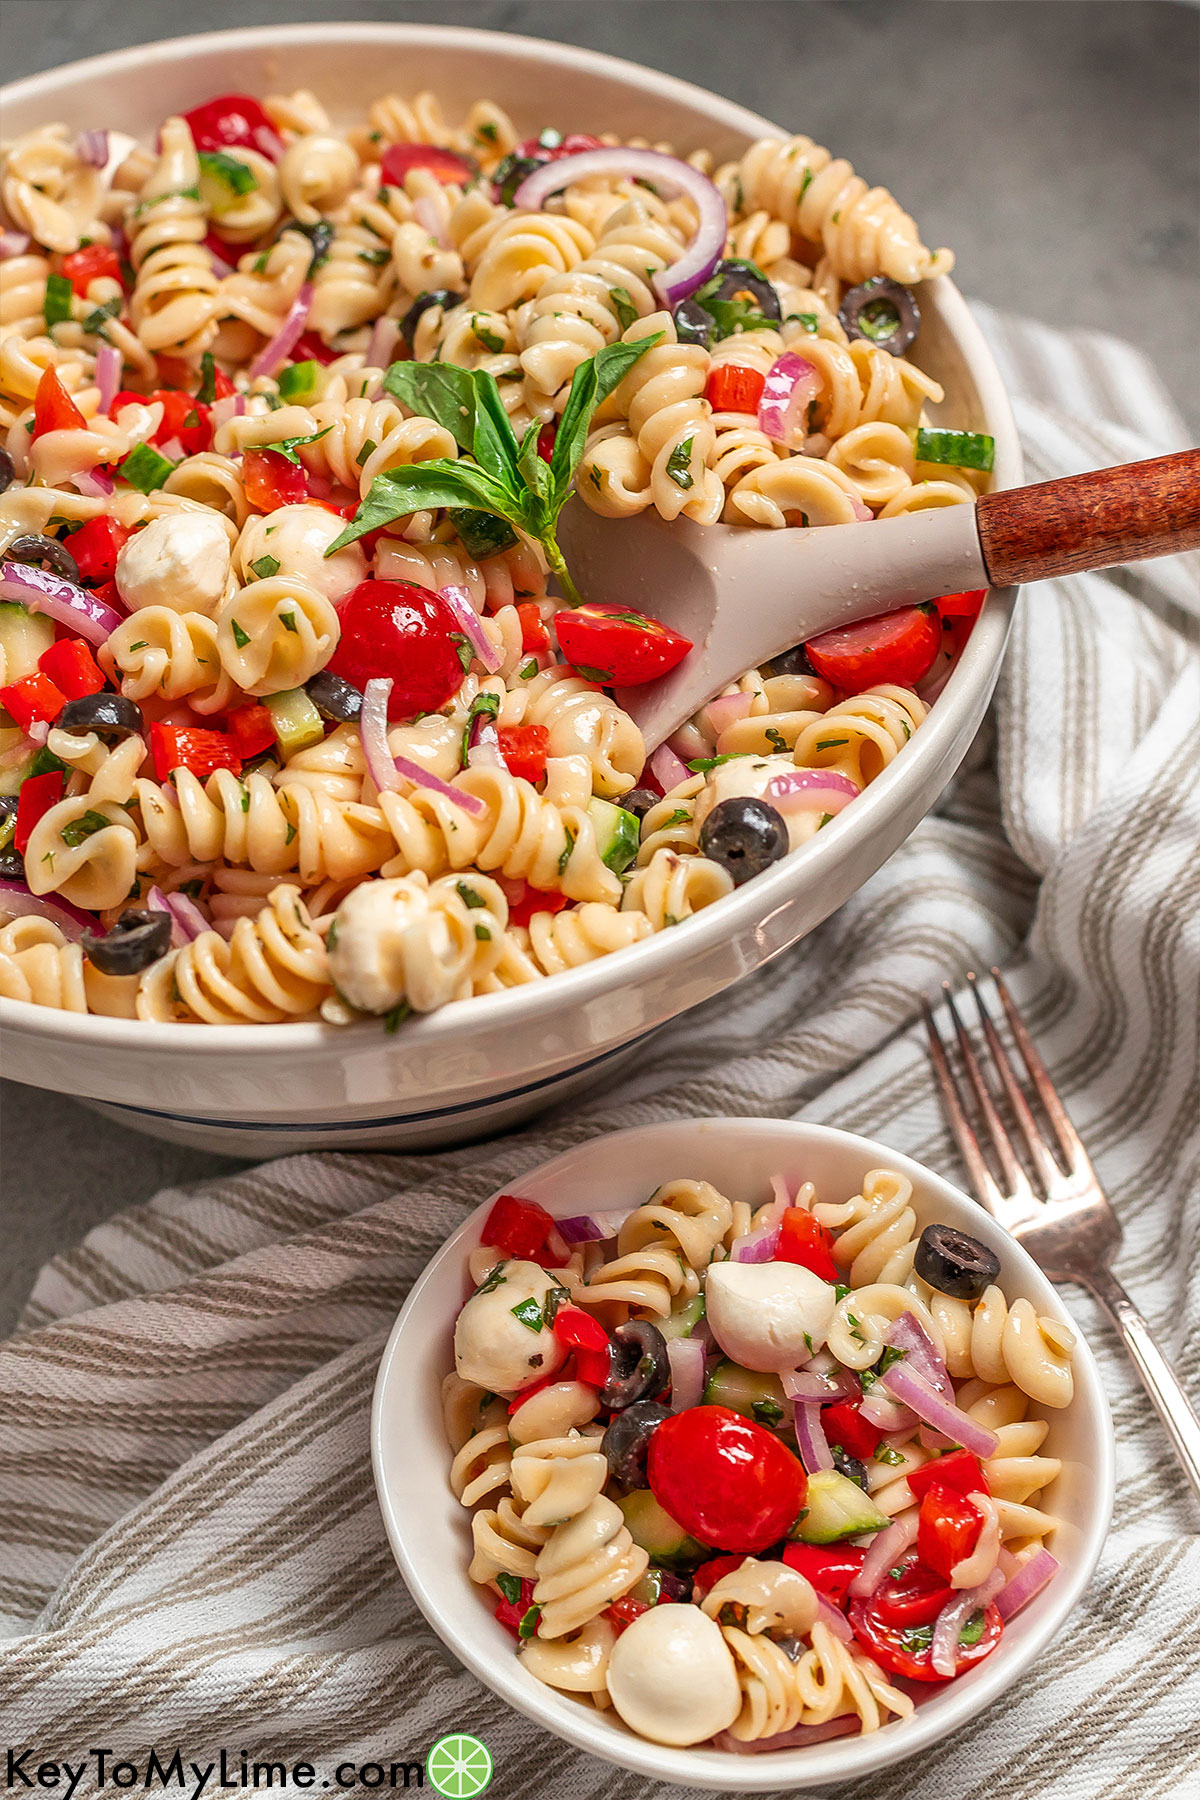 An angled image of a serving dish full of pasta with a serving spoon scooping out some pasta.